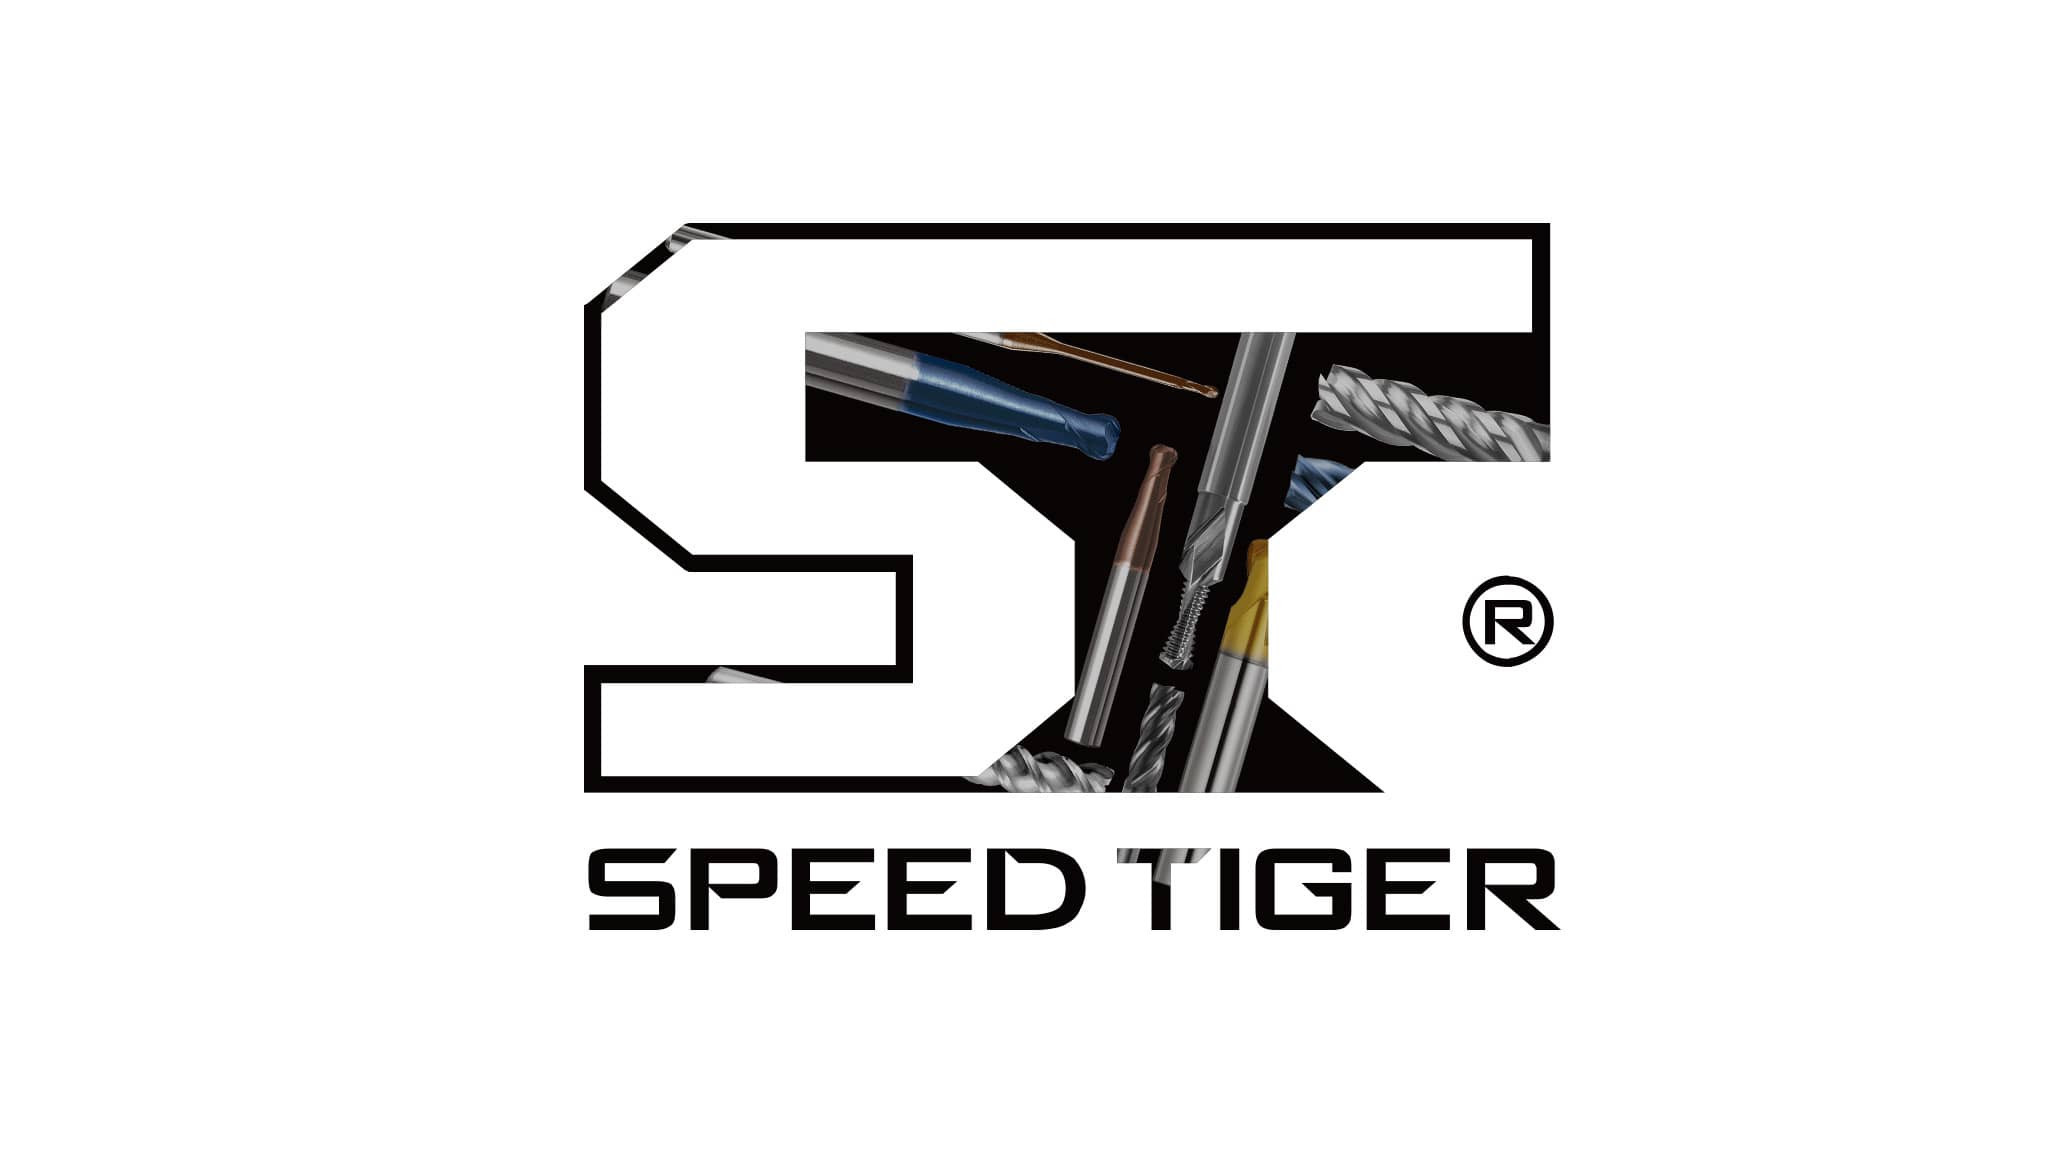 About|SPEED TIGER PRECISION TECHNOLOGY CO., LTD.